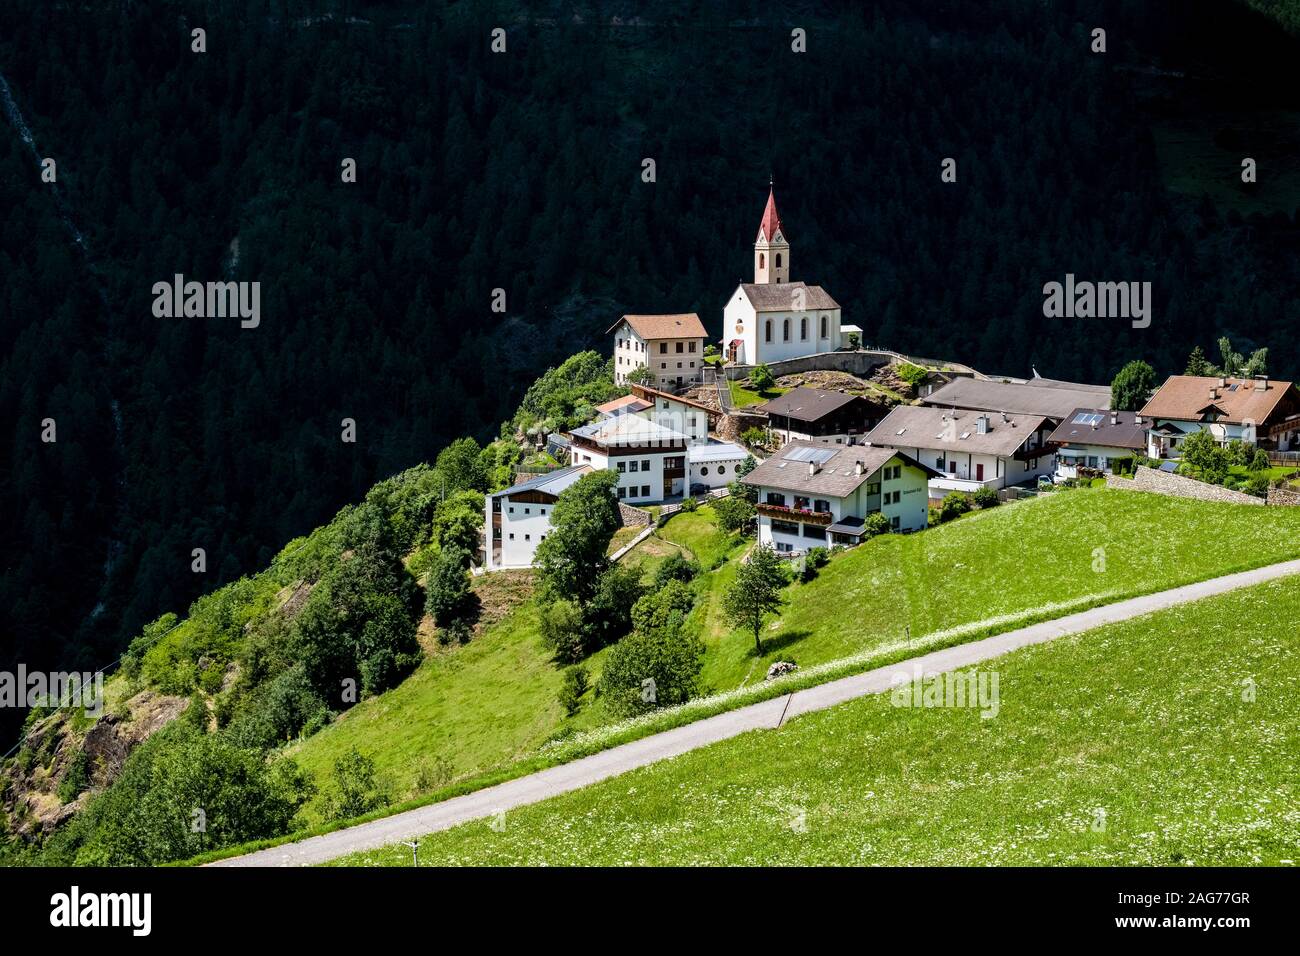 The old parish church St. Katharina and the houses of the village Katharinaberg, Monte Santa Caterina, on a mountain slope above the valley Schnalstal Stock Photo